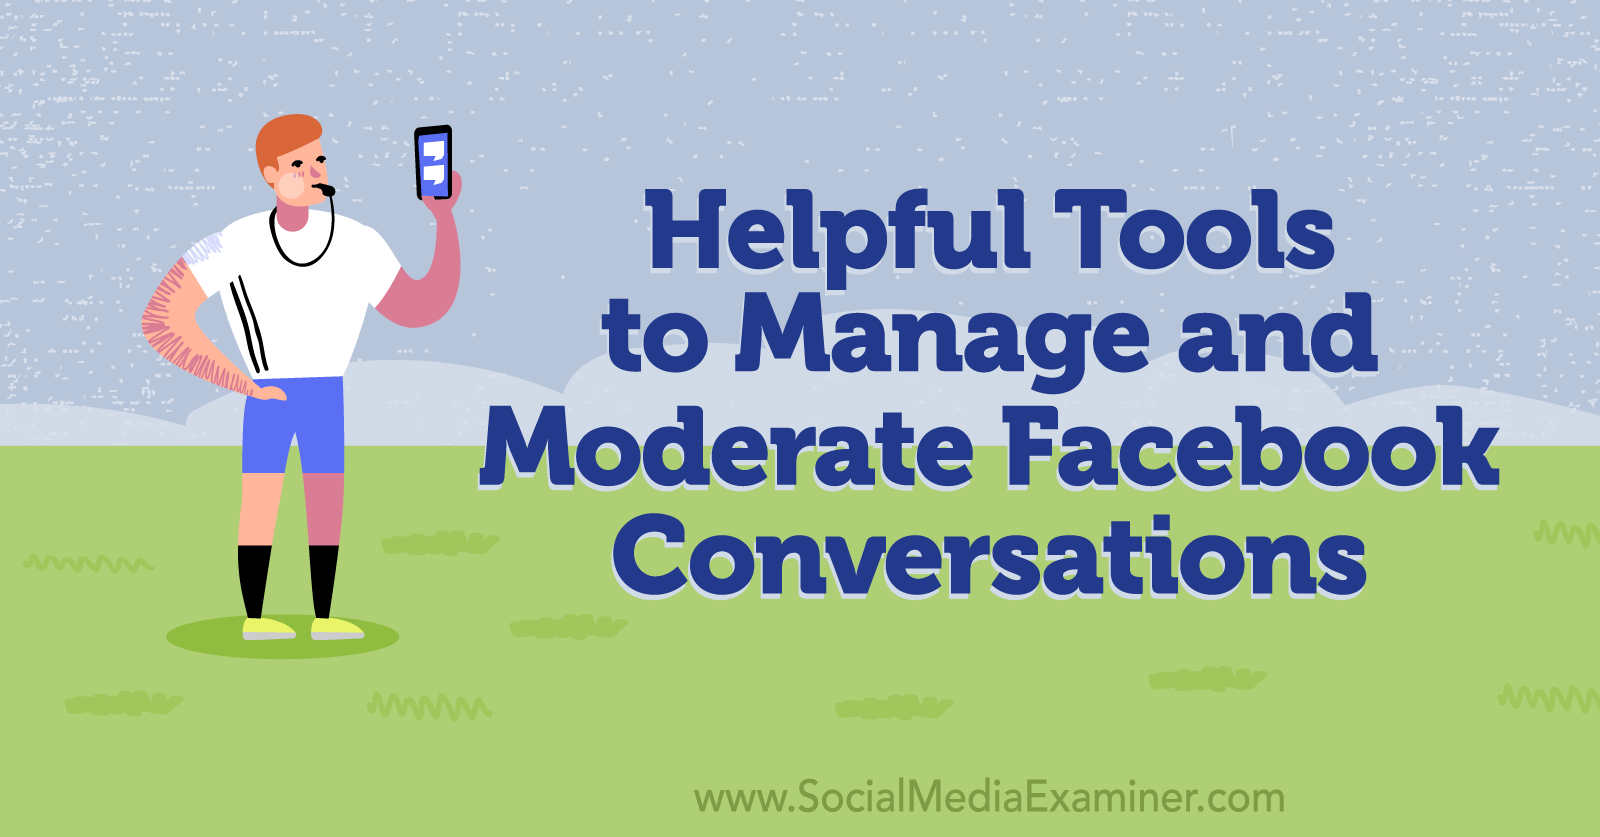 Helpful Tools to Manage and Moderate Facebook Conversations-Social Media Examiner